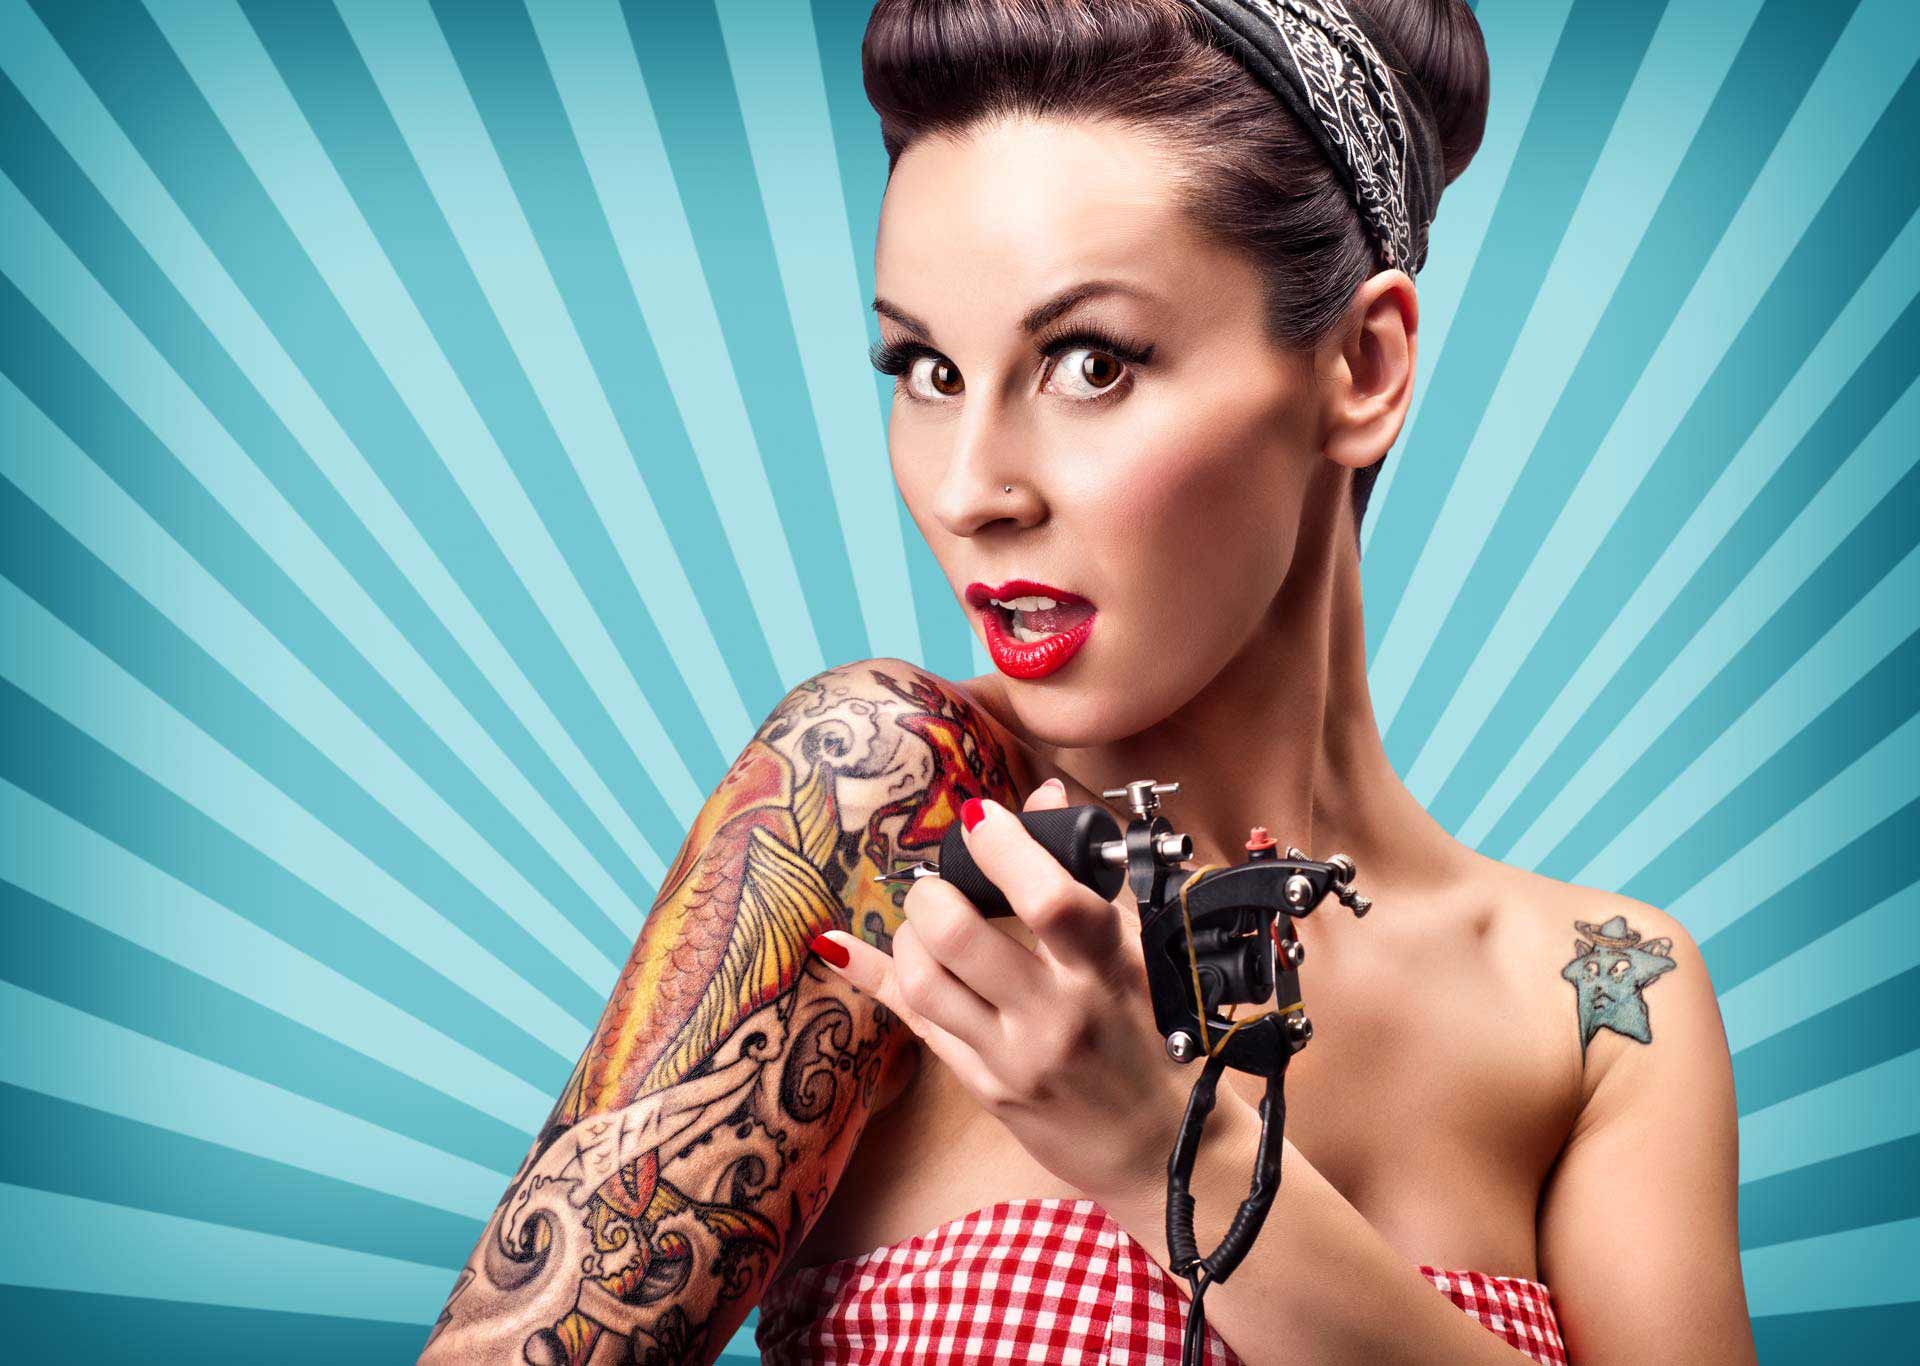 a woman with a tattoo on her arm is holding a tattoo machine